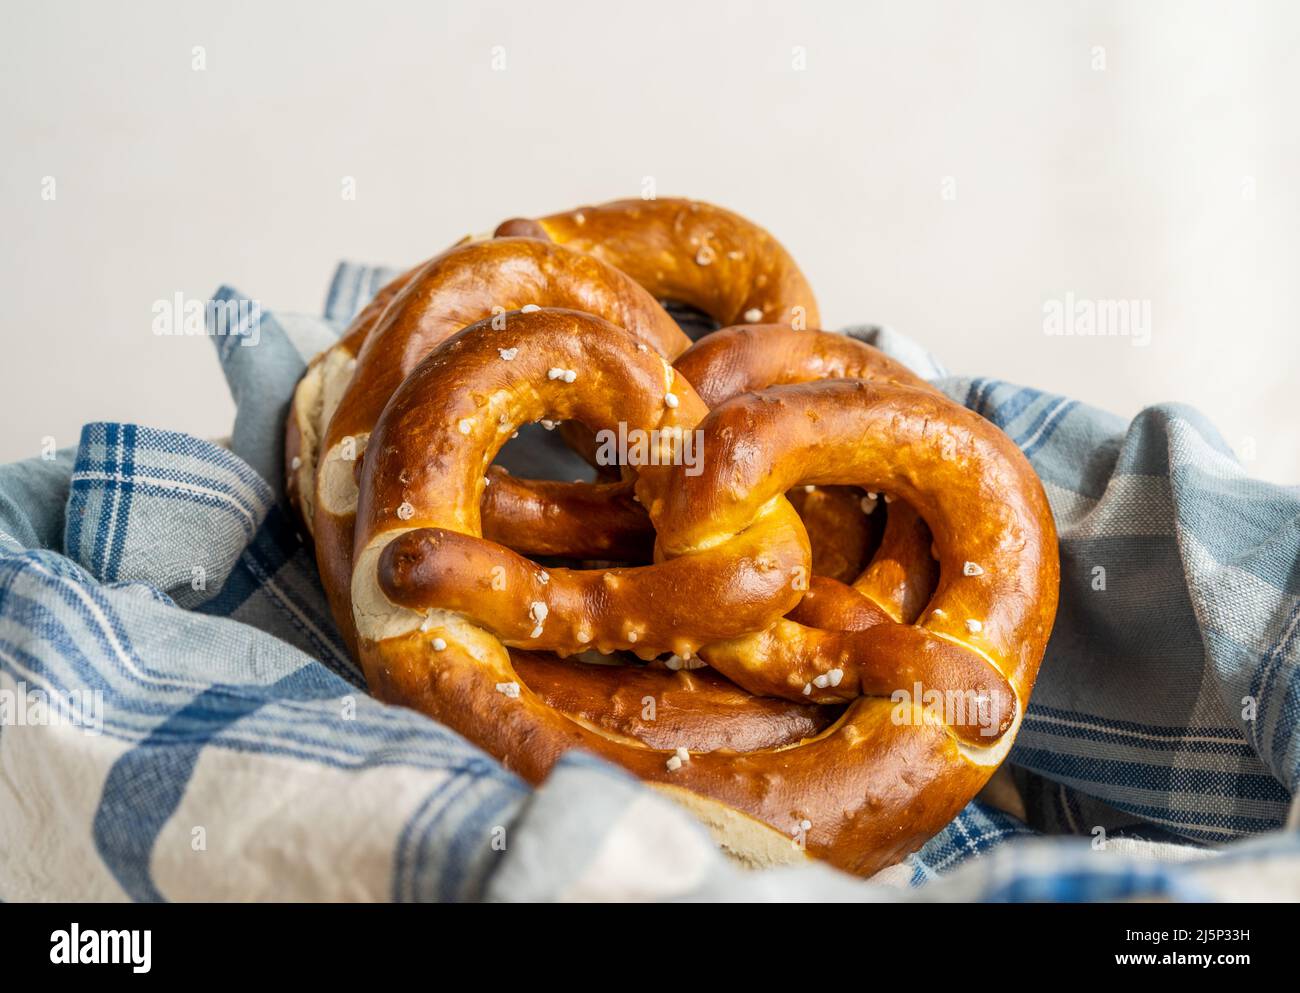 Group of brezels or pretzels in bread basket with napkin  Stock Photo